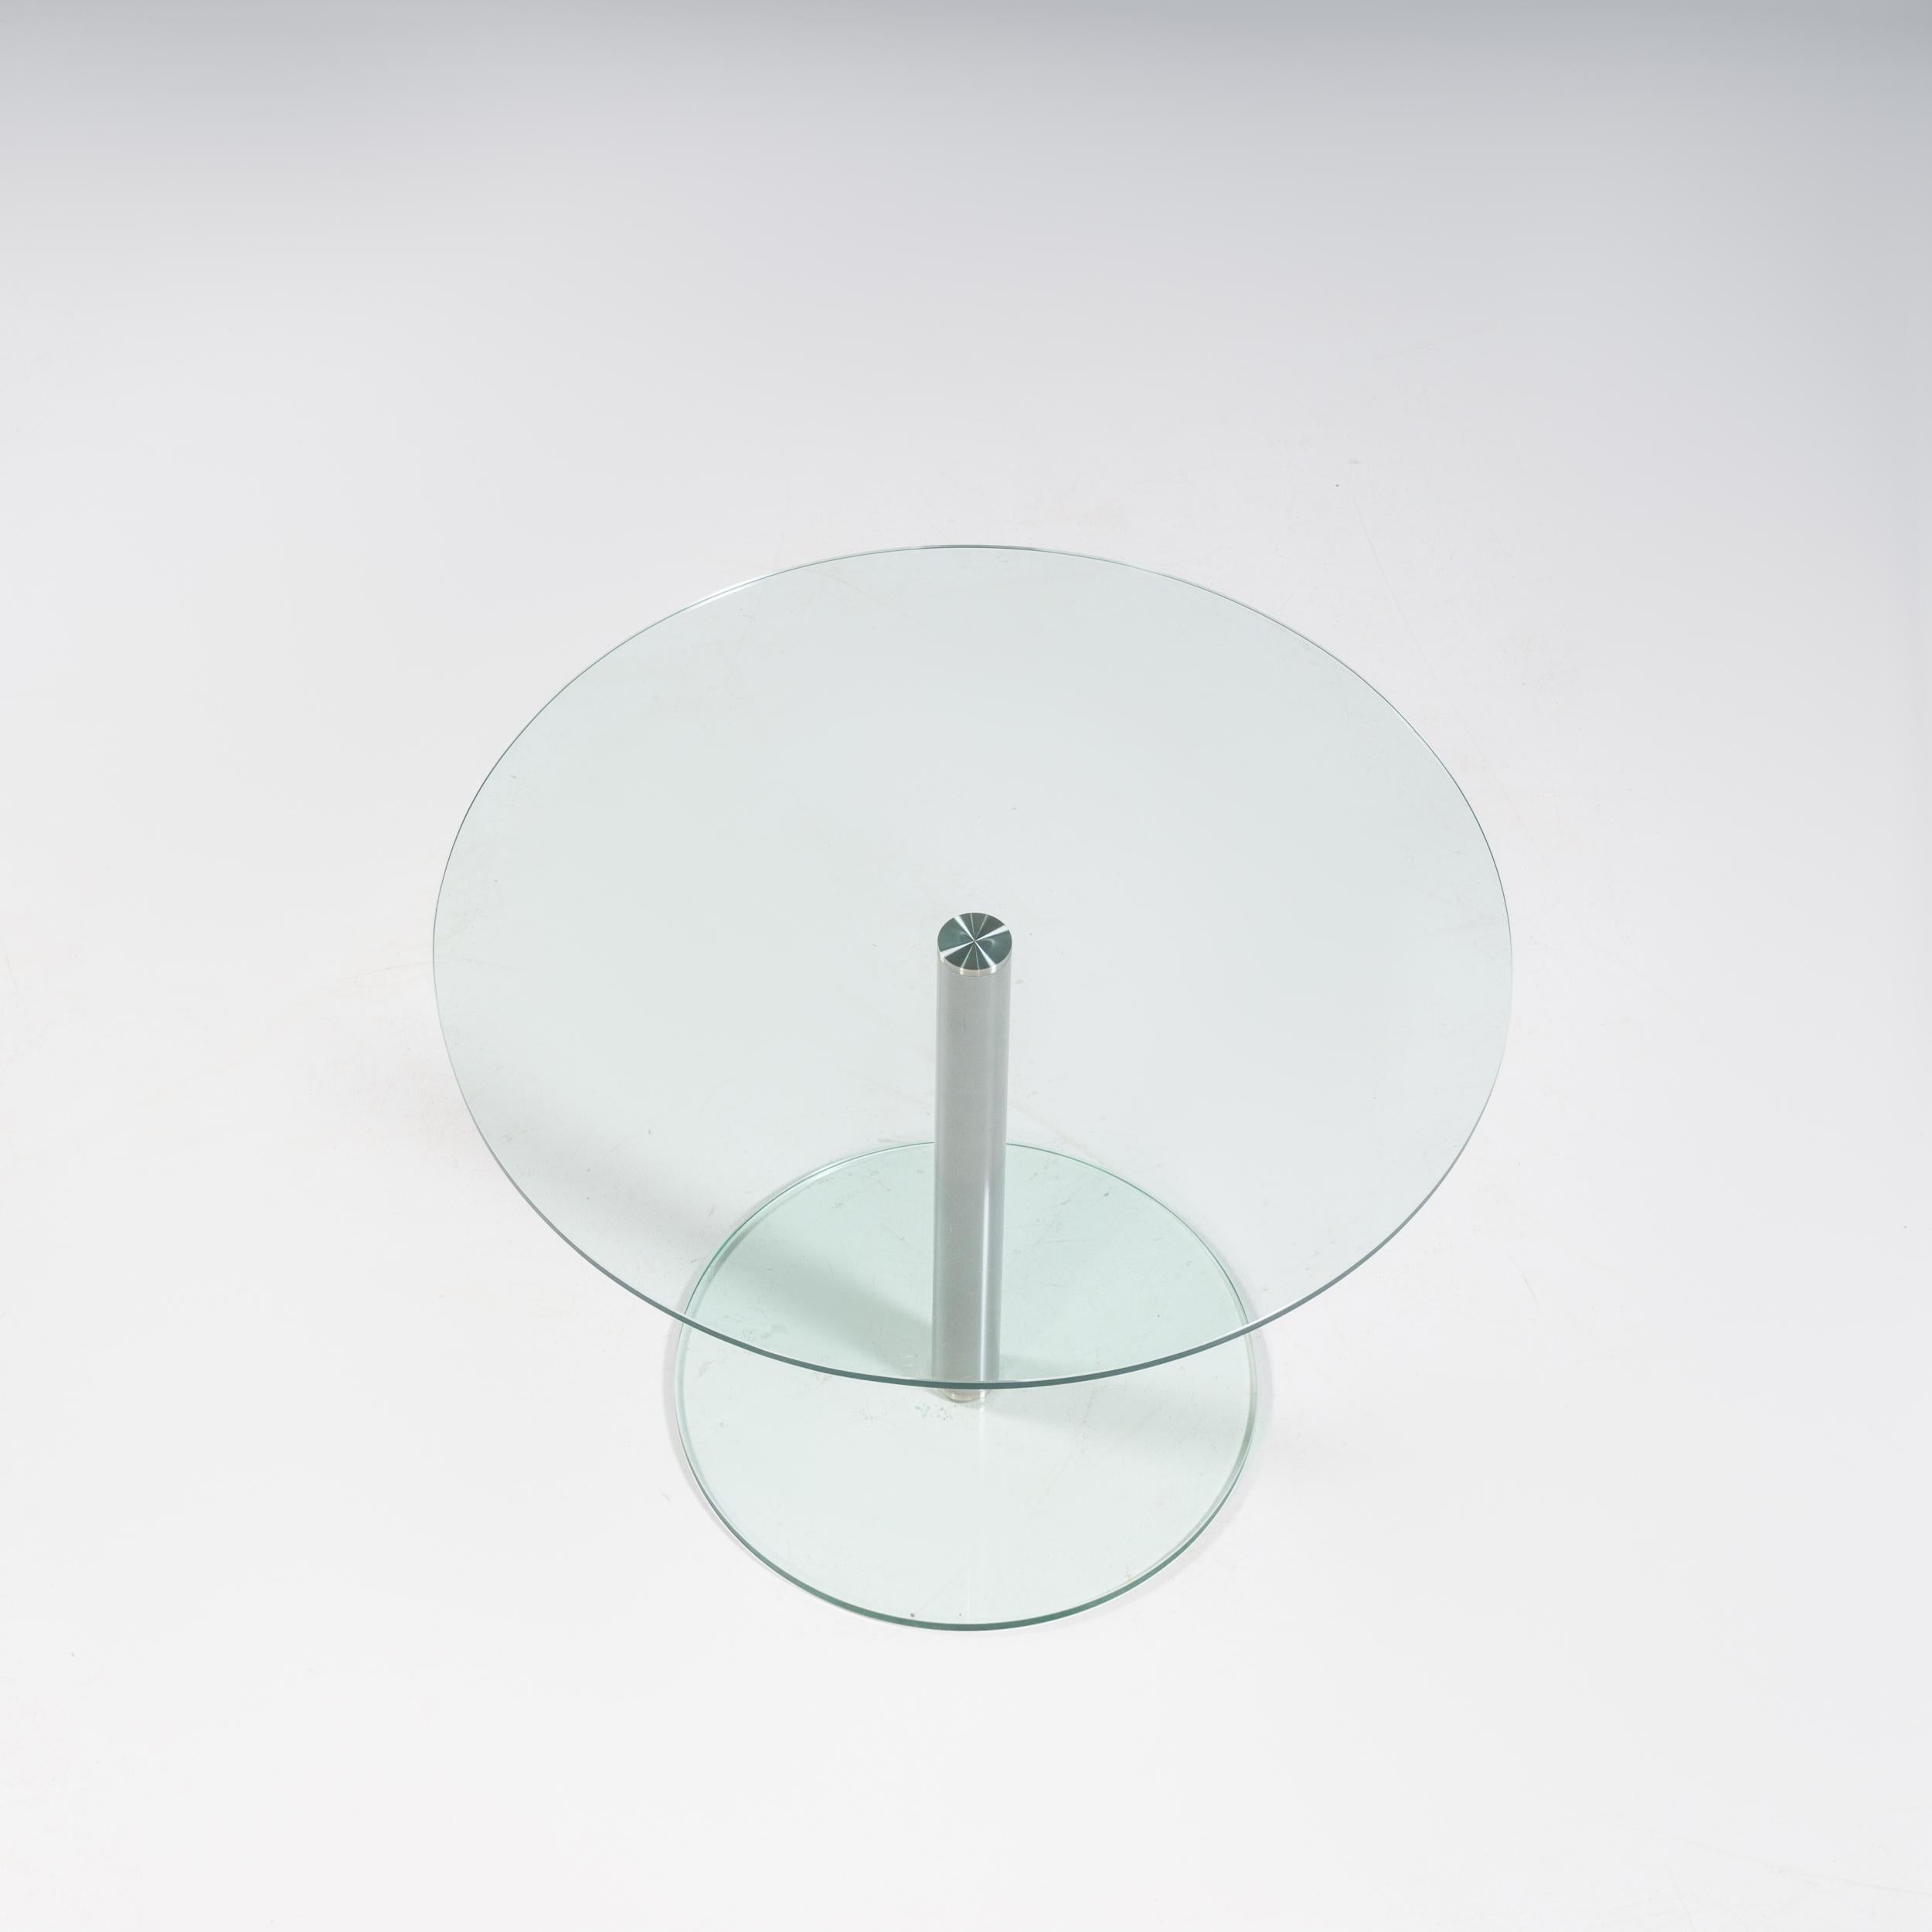 The Circle 100 table is a sleek and sophisticated glass pedestal dining table from The Conran Shop.

Featuring a round toughened glass top and base, the pedestal base has an epoxy-coated steel support and can seat up to four.

The glass gives